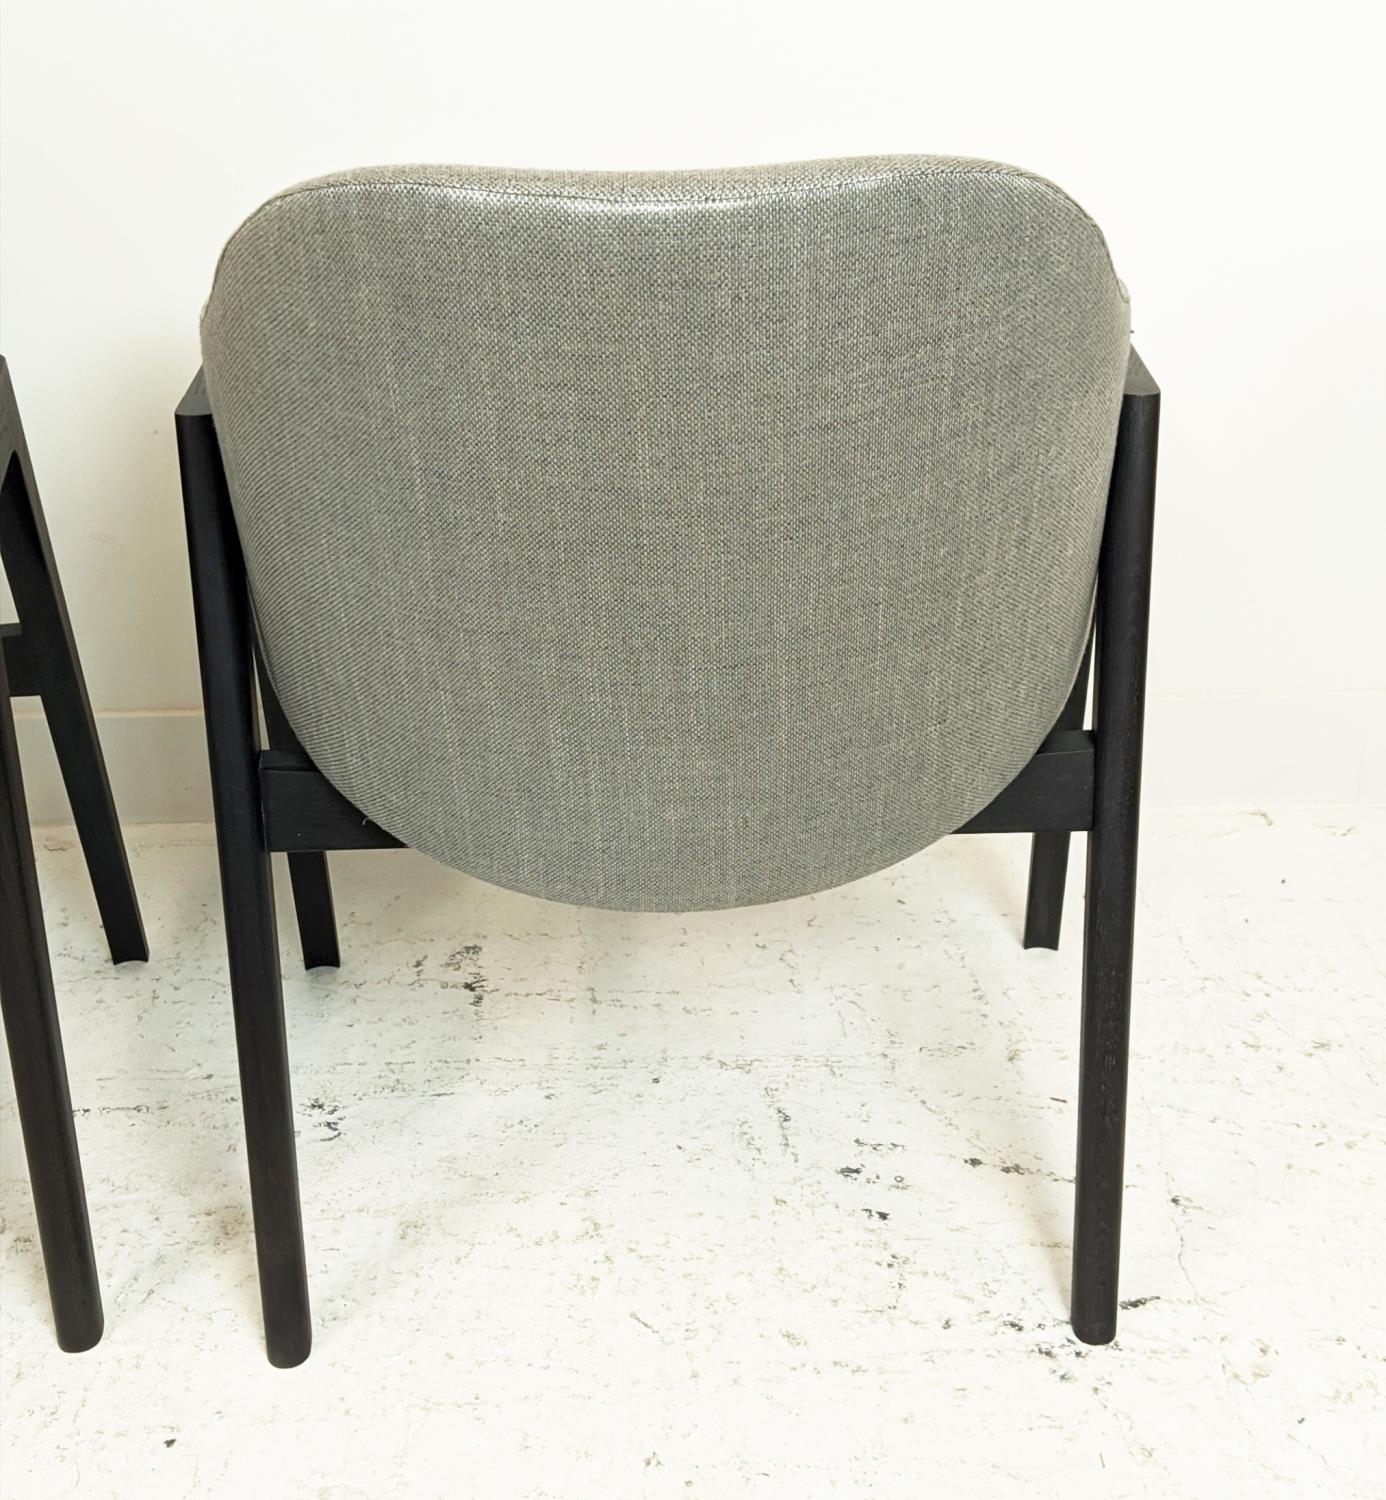 LINLEY SAVILLE DINING CHAIRS, a set of four, by Matthew Hilton, 80cm H approx. (4) - Image 9 of 11